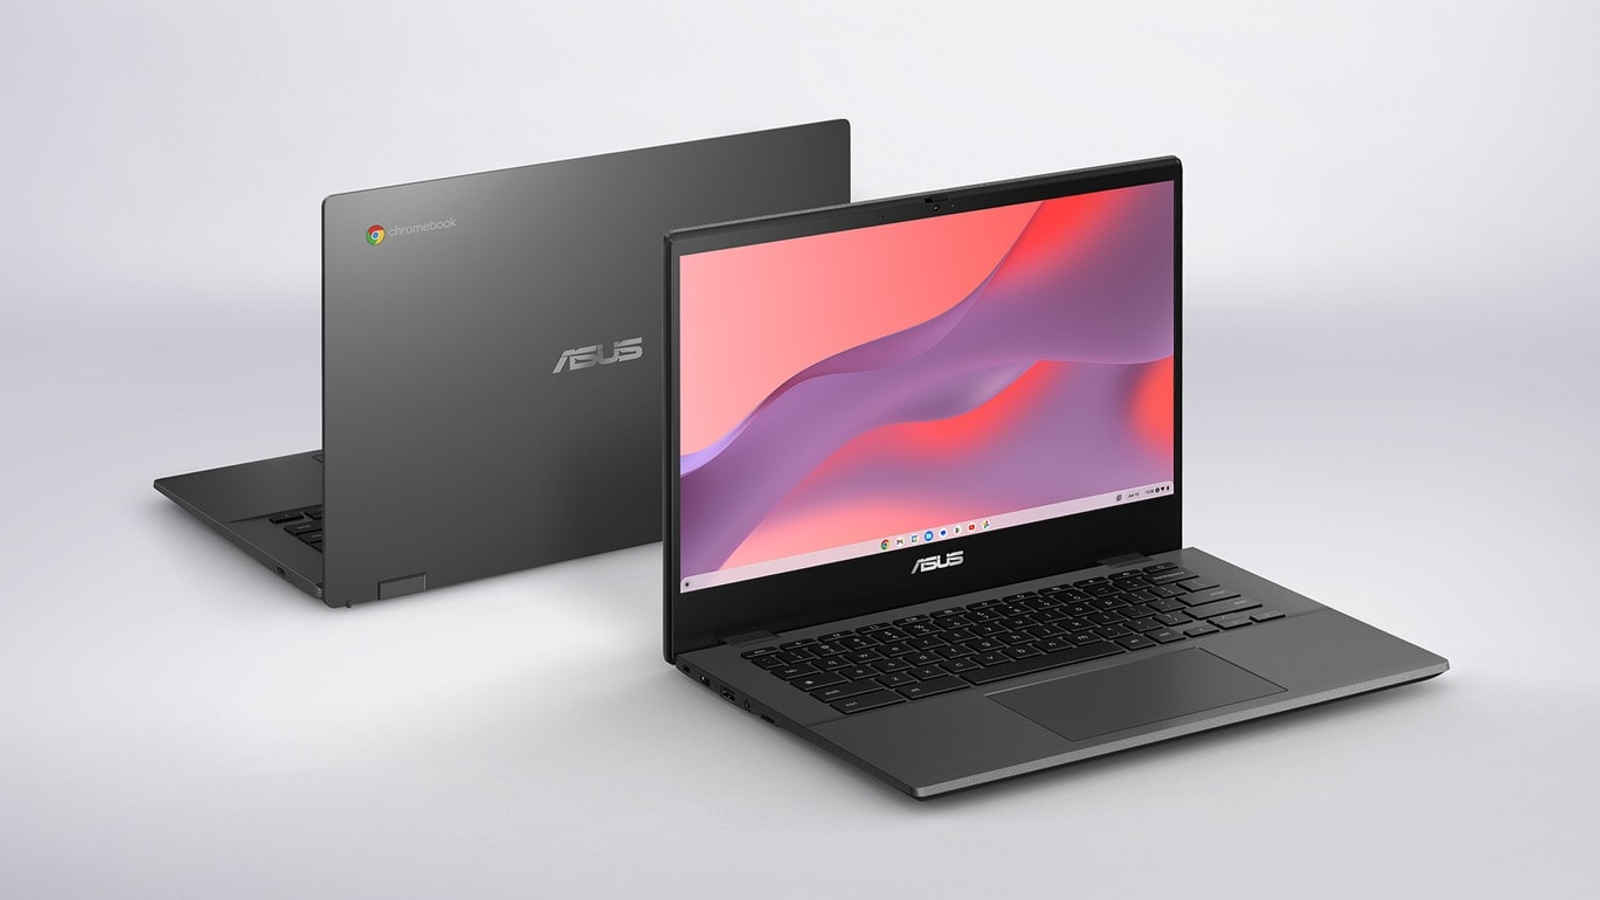 Asus launches Mediatek-powered Chromebook with 15 hours of battery life | Technology News